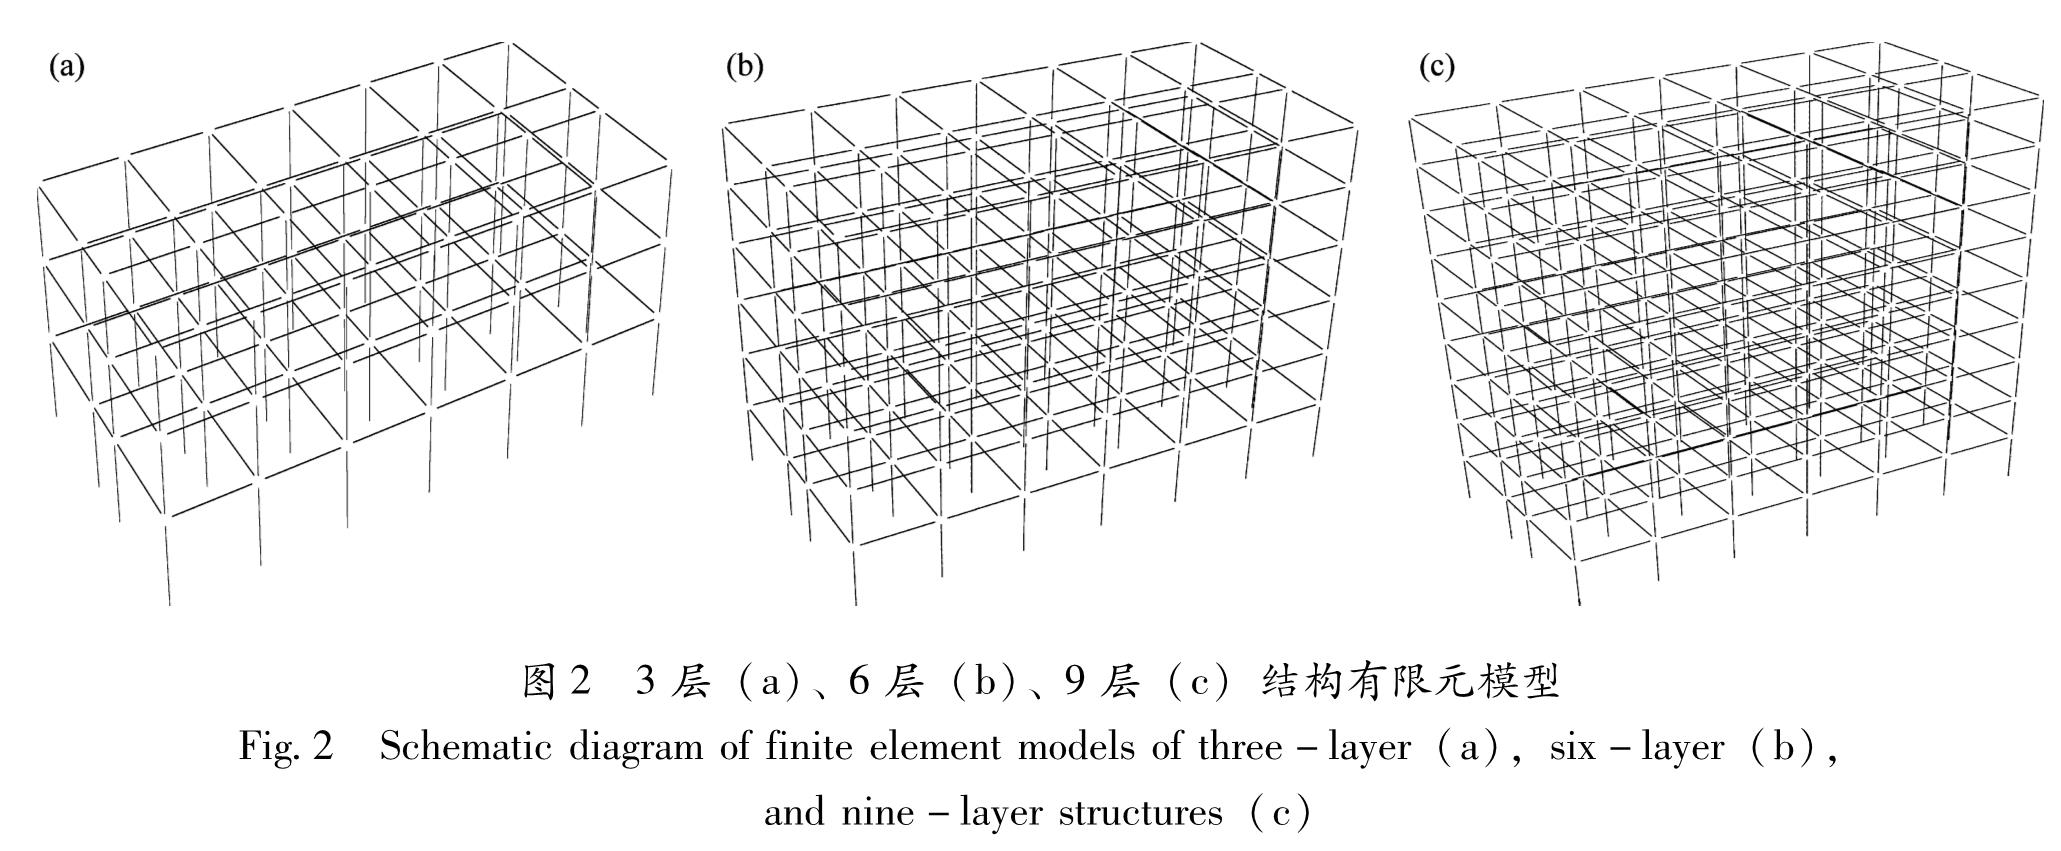 图2 3层(a)、6层(b)、9层(c)结构有限元模型<br/>Fig.2 Schematic diagram of finite element models of three-layer(a),six-layer(b),and nine-layer structures(c)